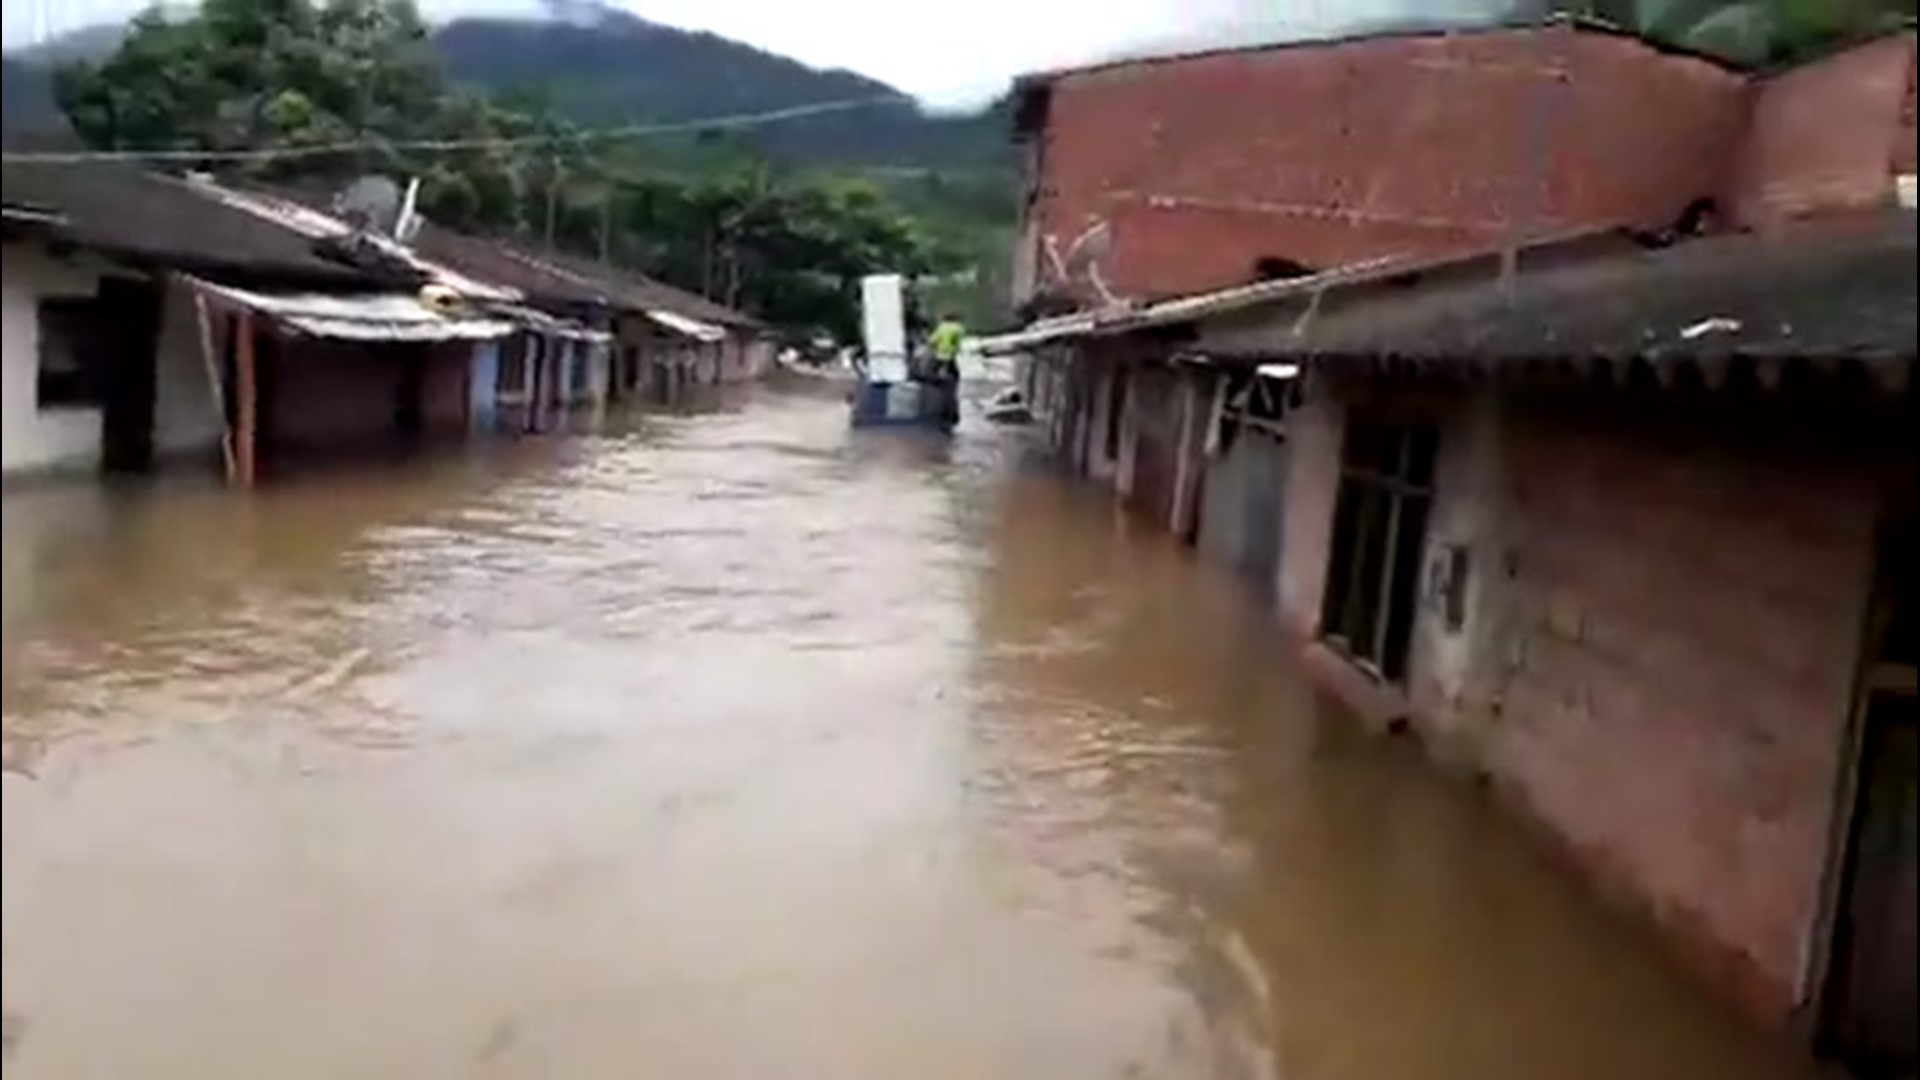 Heavy rainfall triggered flash flooding in Guanay, Bolivia, on Jan. 18. It caused the nearby Mapiri and Tipuani rivers to overflow, swallowing many homes and leaving the streets submerged.